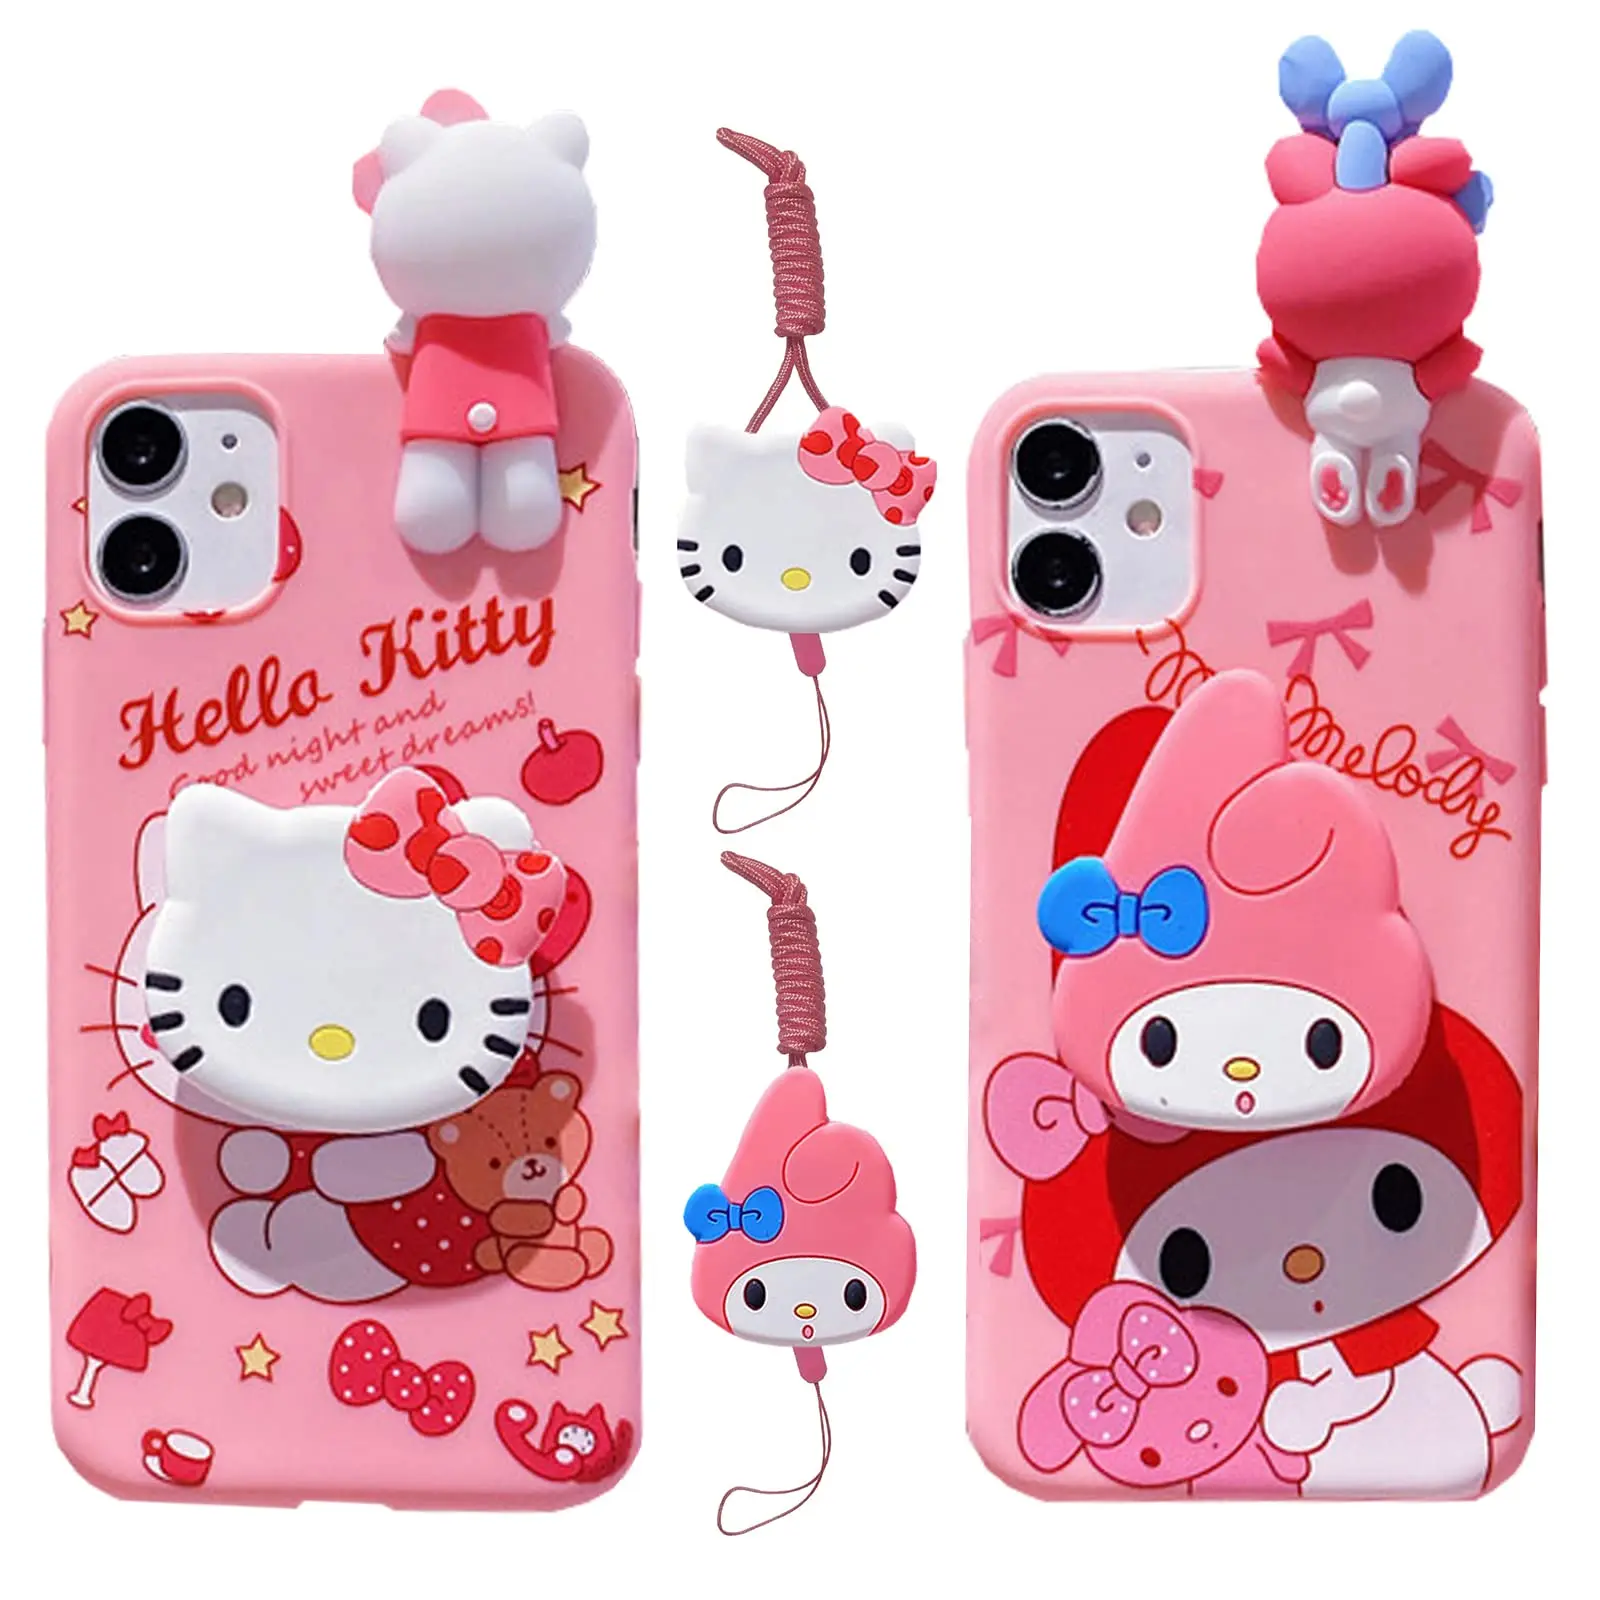 For iPhone 6 6s 7 8 X Xs Max XR 11 12 13 14 Pro SE Max Case My Melody Hello Kitty TPU Soft Phone Case With Holder Strap Rope